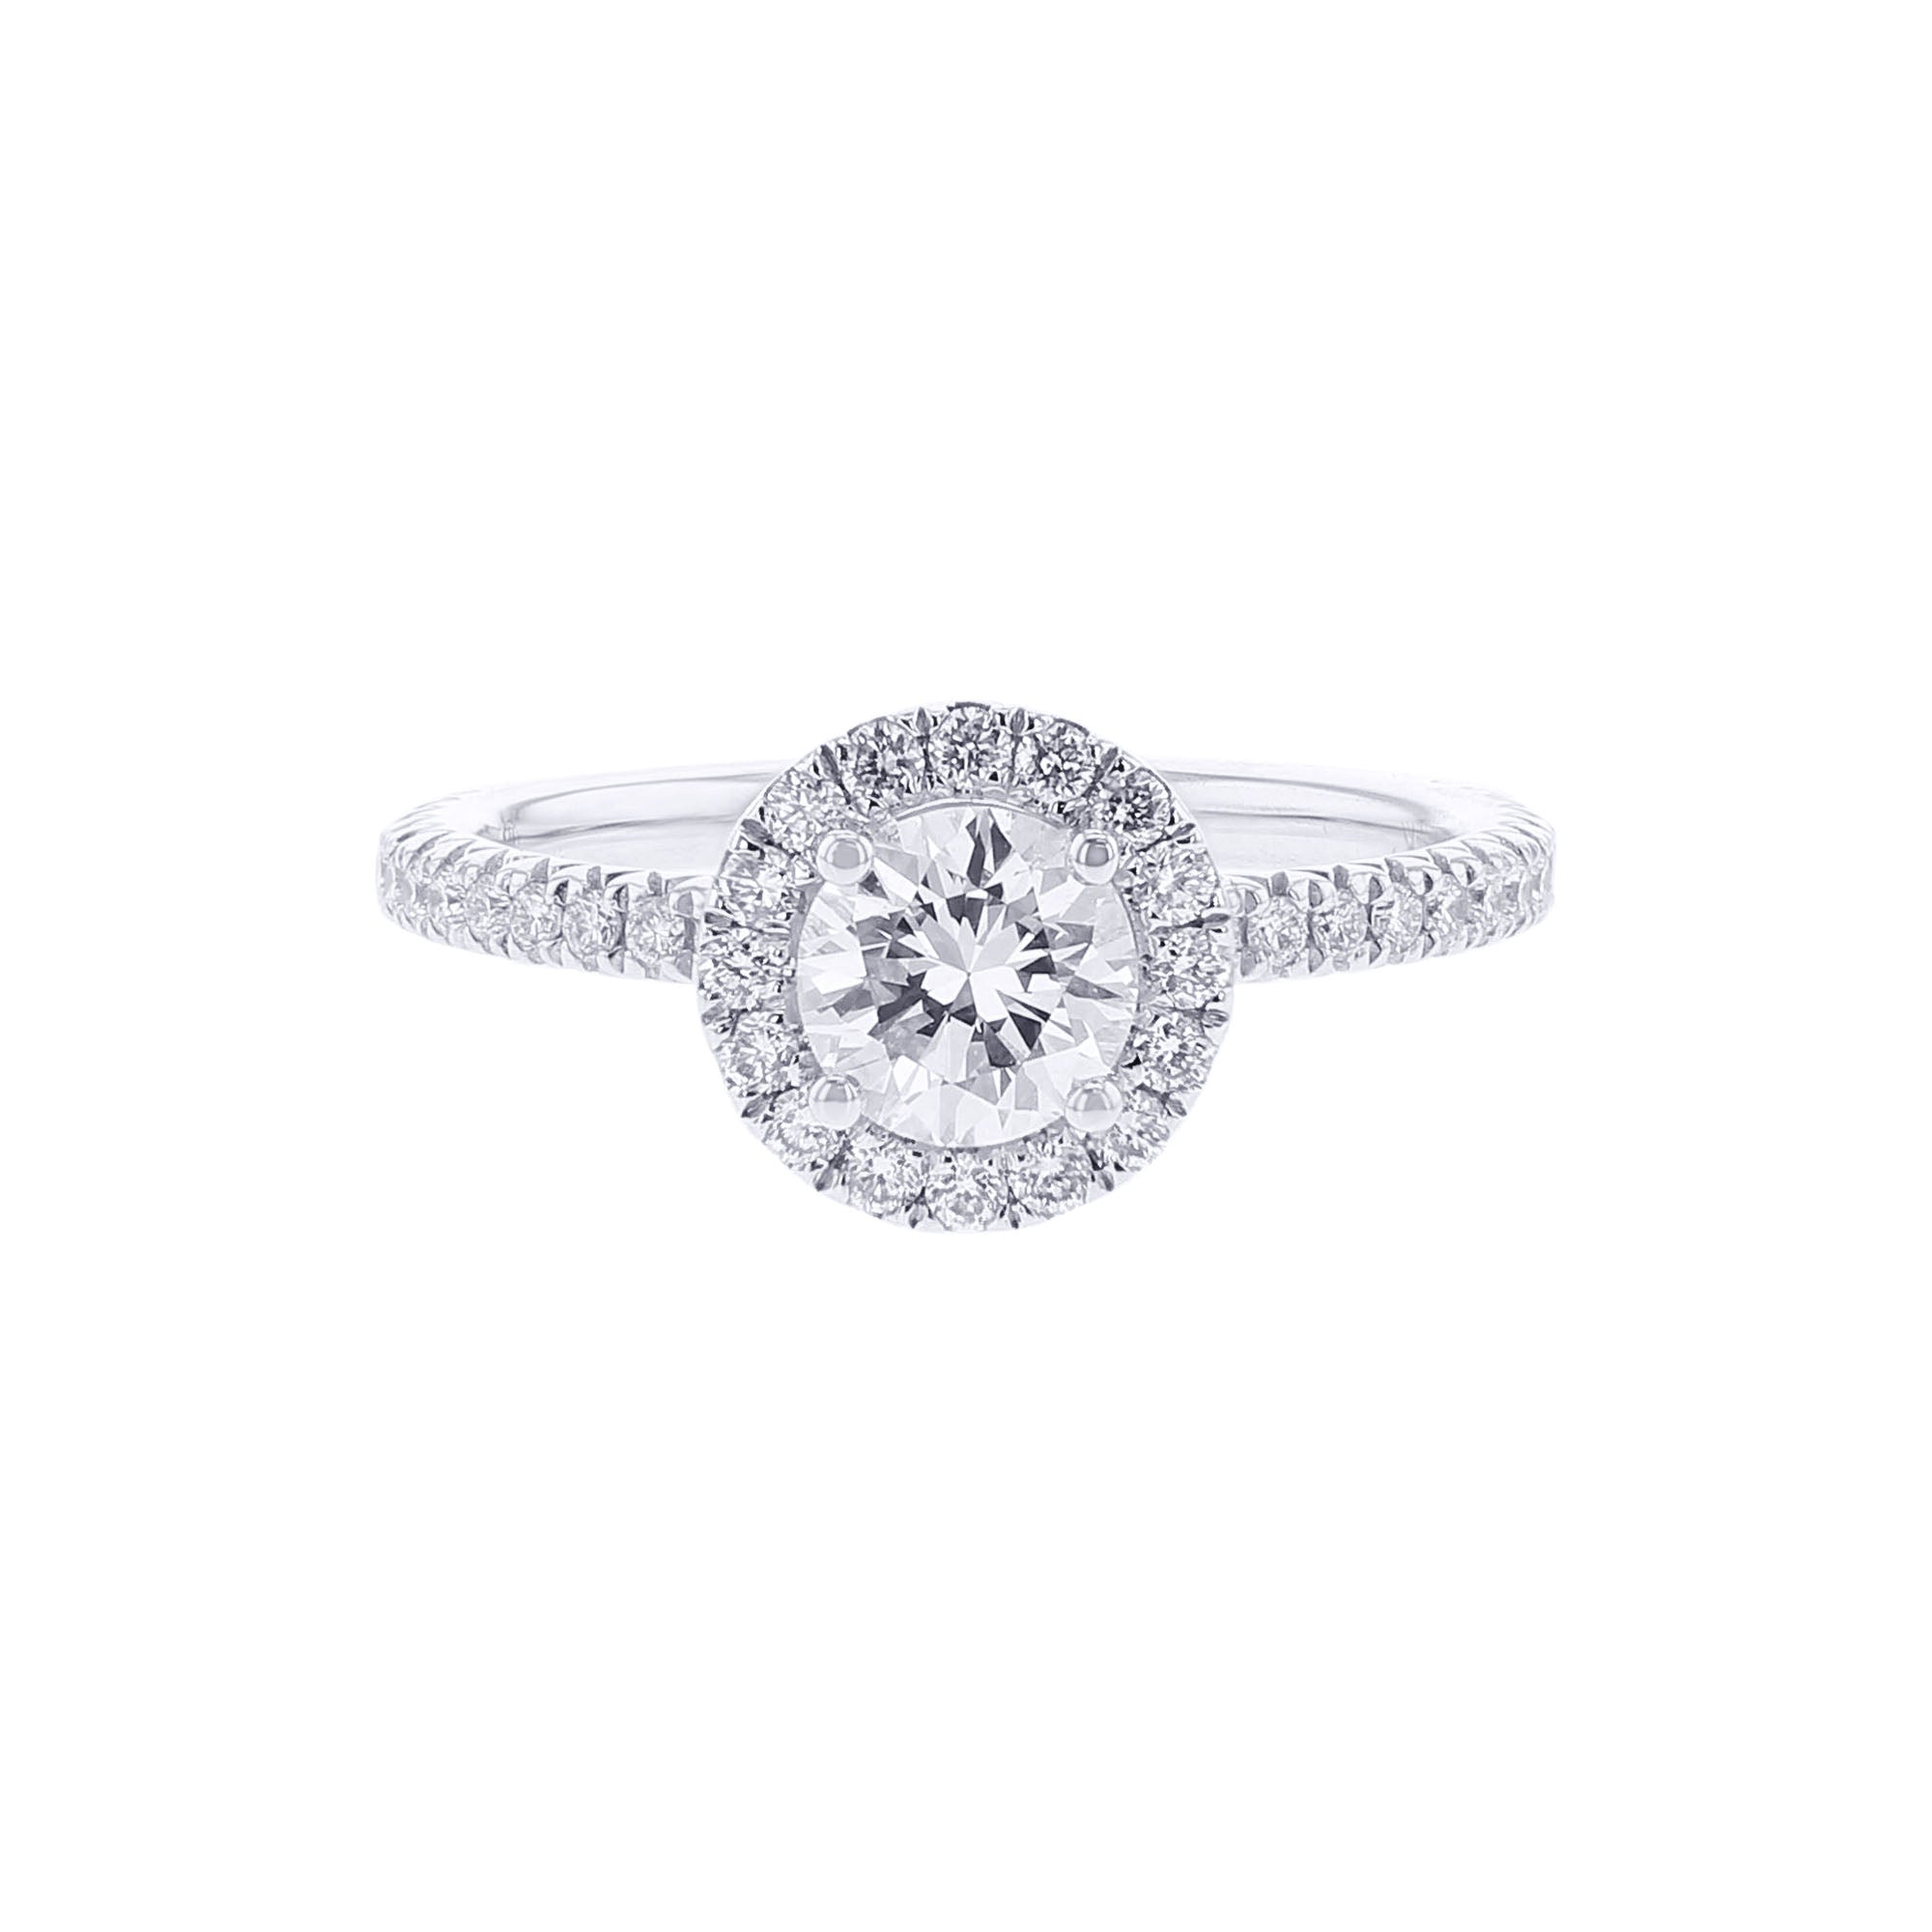 Saylor Certified Ready for Love Diamond Halo Engagement Ring 1ct